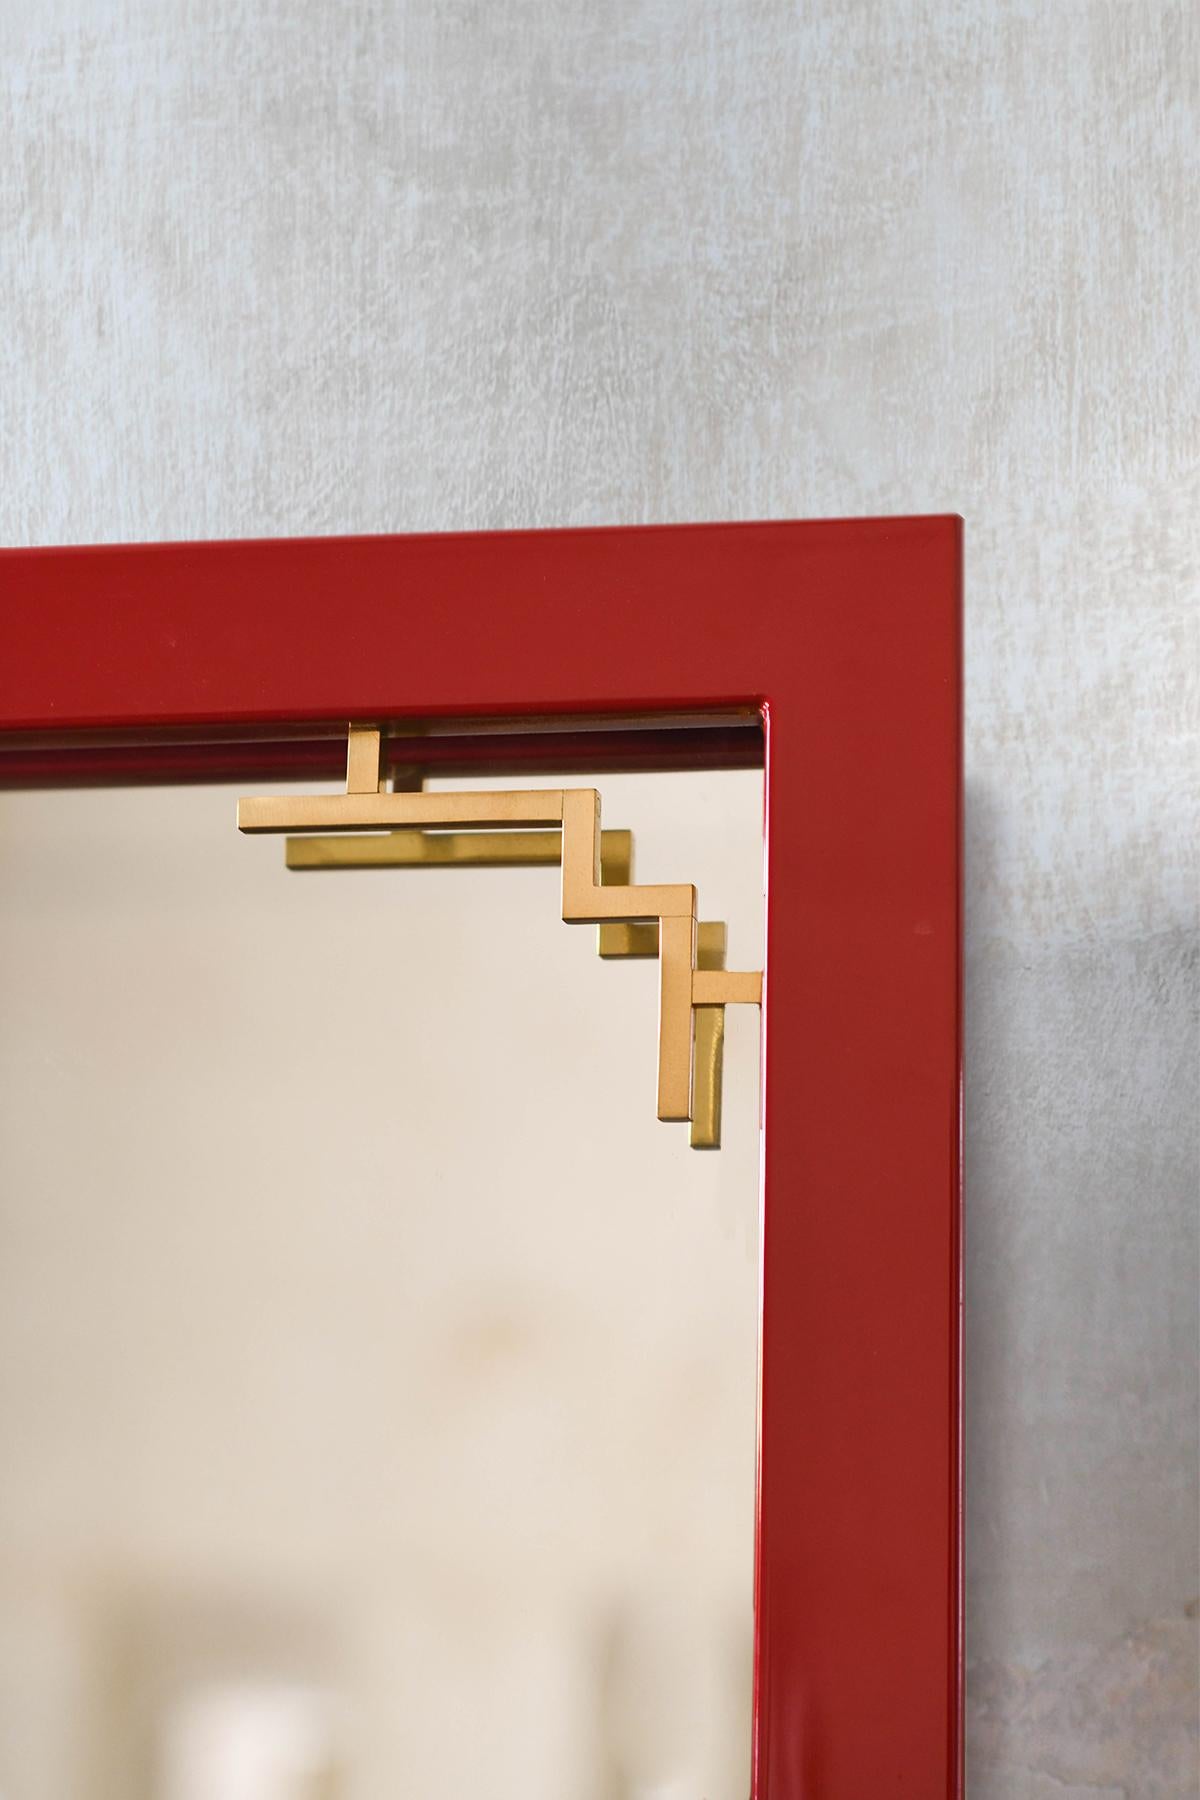 China Red Mirror With Brass Details From The 1970s – Lacquered Series
Product details
Dimensions 90 W x 90 H x 2 D cm